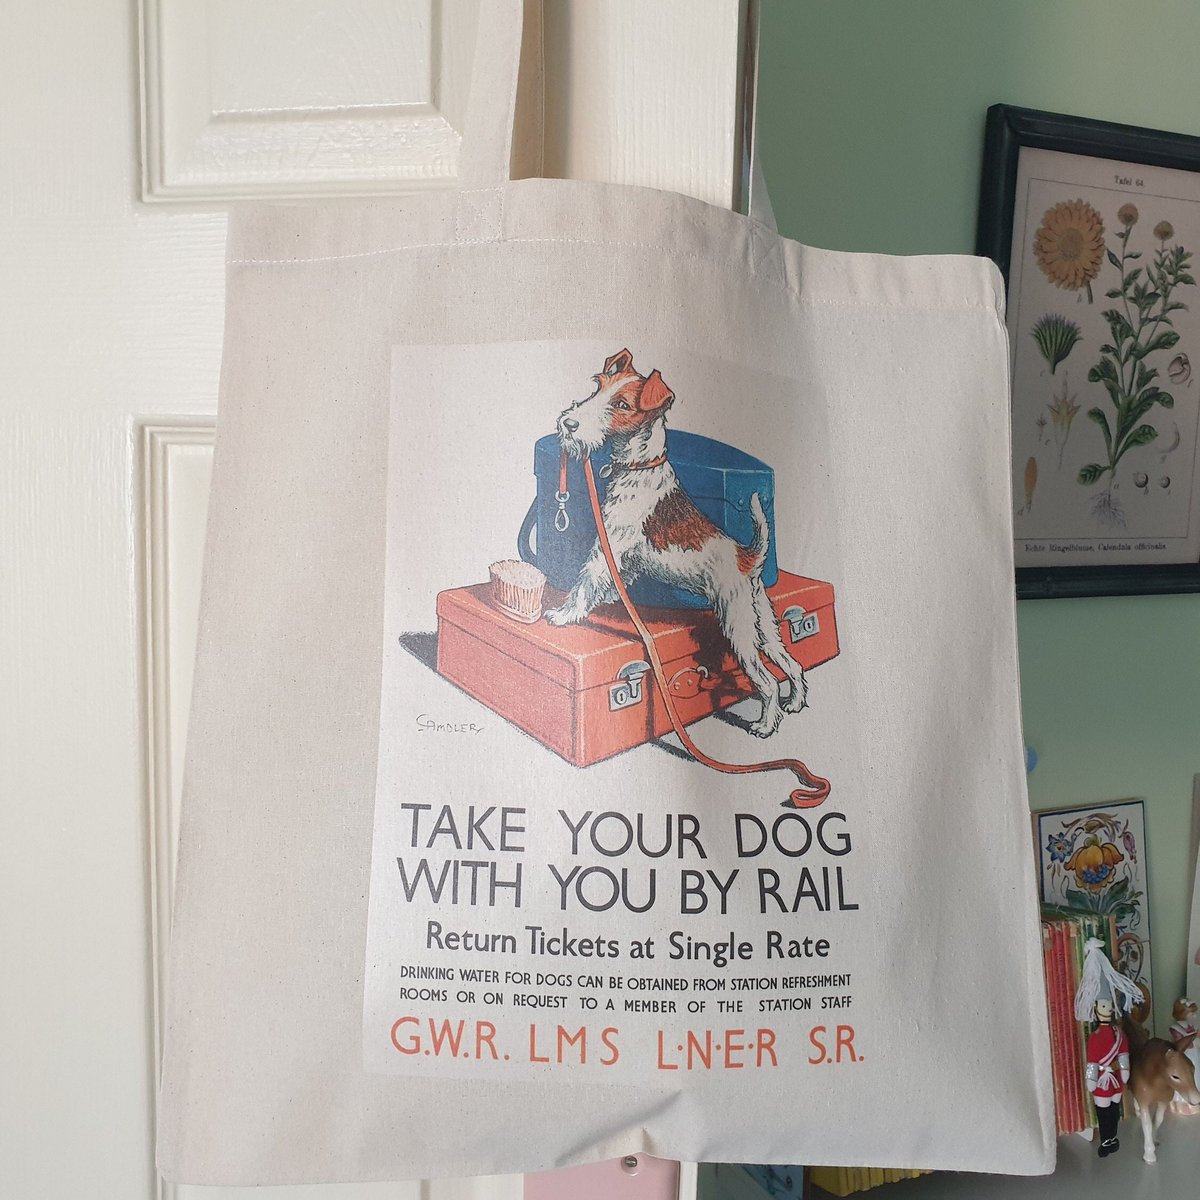 Everyone loved this tote at Saturday's fair! Perfect for Father's day too. 25% off any item/items over £10. #earlybiz #doglovers #petparent
sarahbenning.etsy.com/listing/122774…